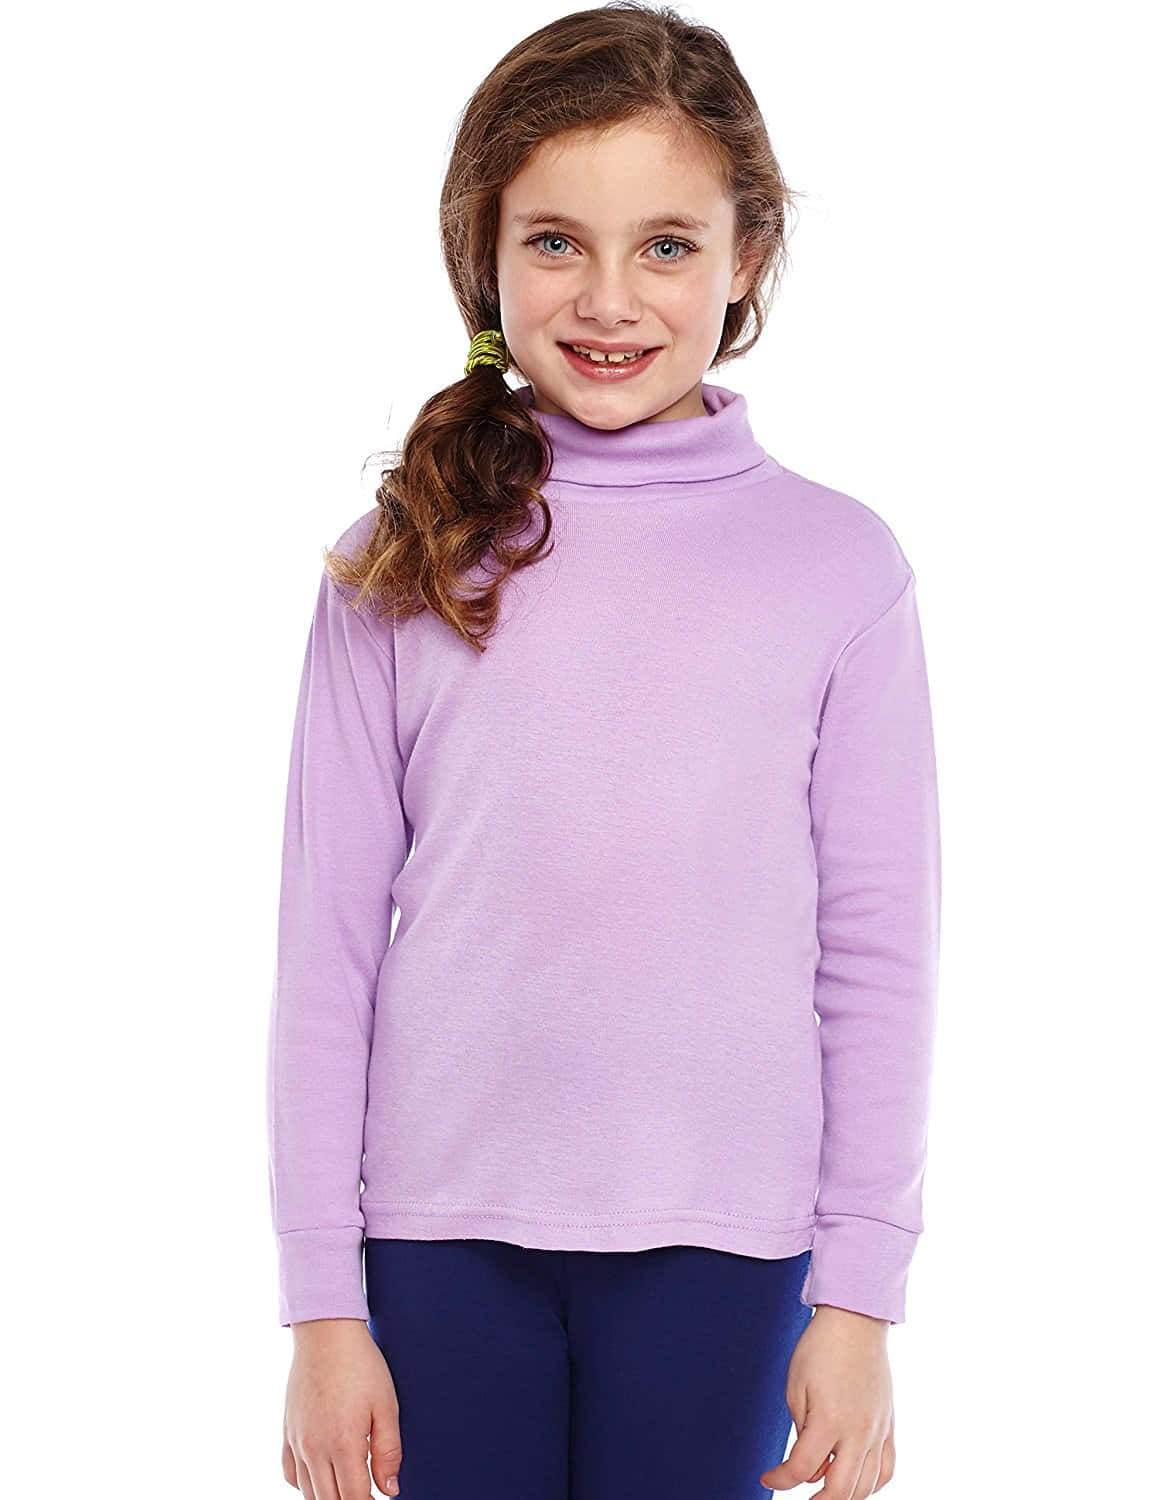 "Wrap yourself in this cool and comfortable purple turtle-neck sweater." Wallpaper